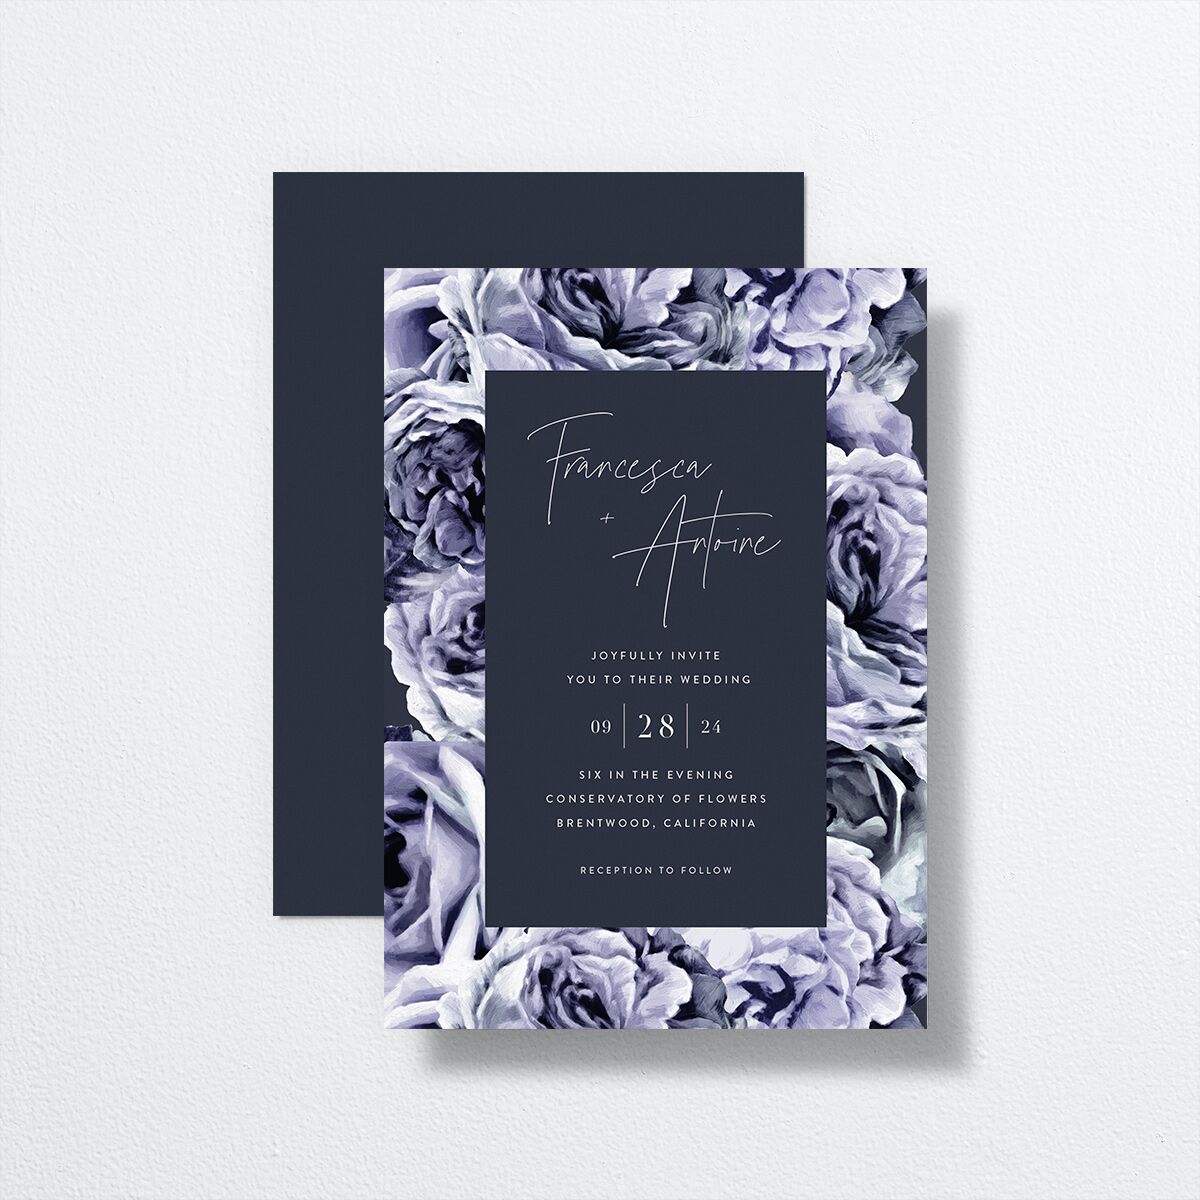 Rose Garden Wedding Invitations by Vera Wang front-and-back in blue